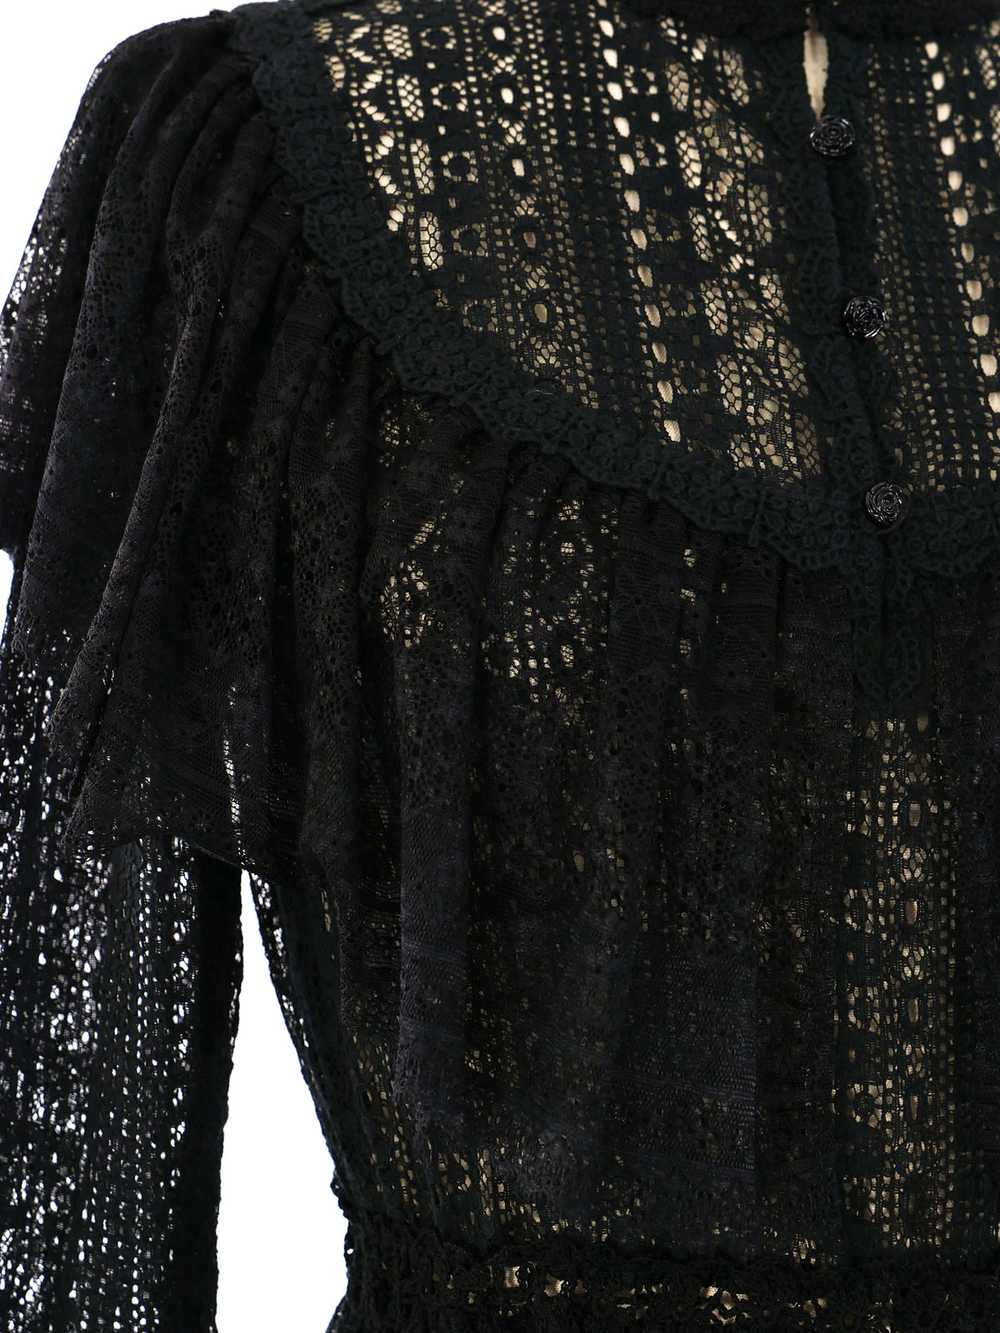 Black Tiered Lace Maxi Dress - image 2